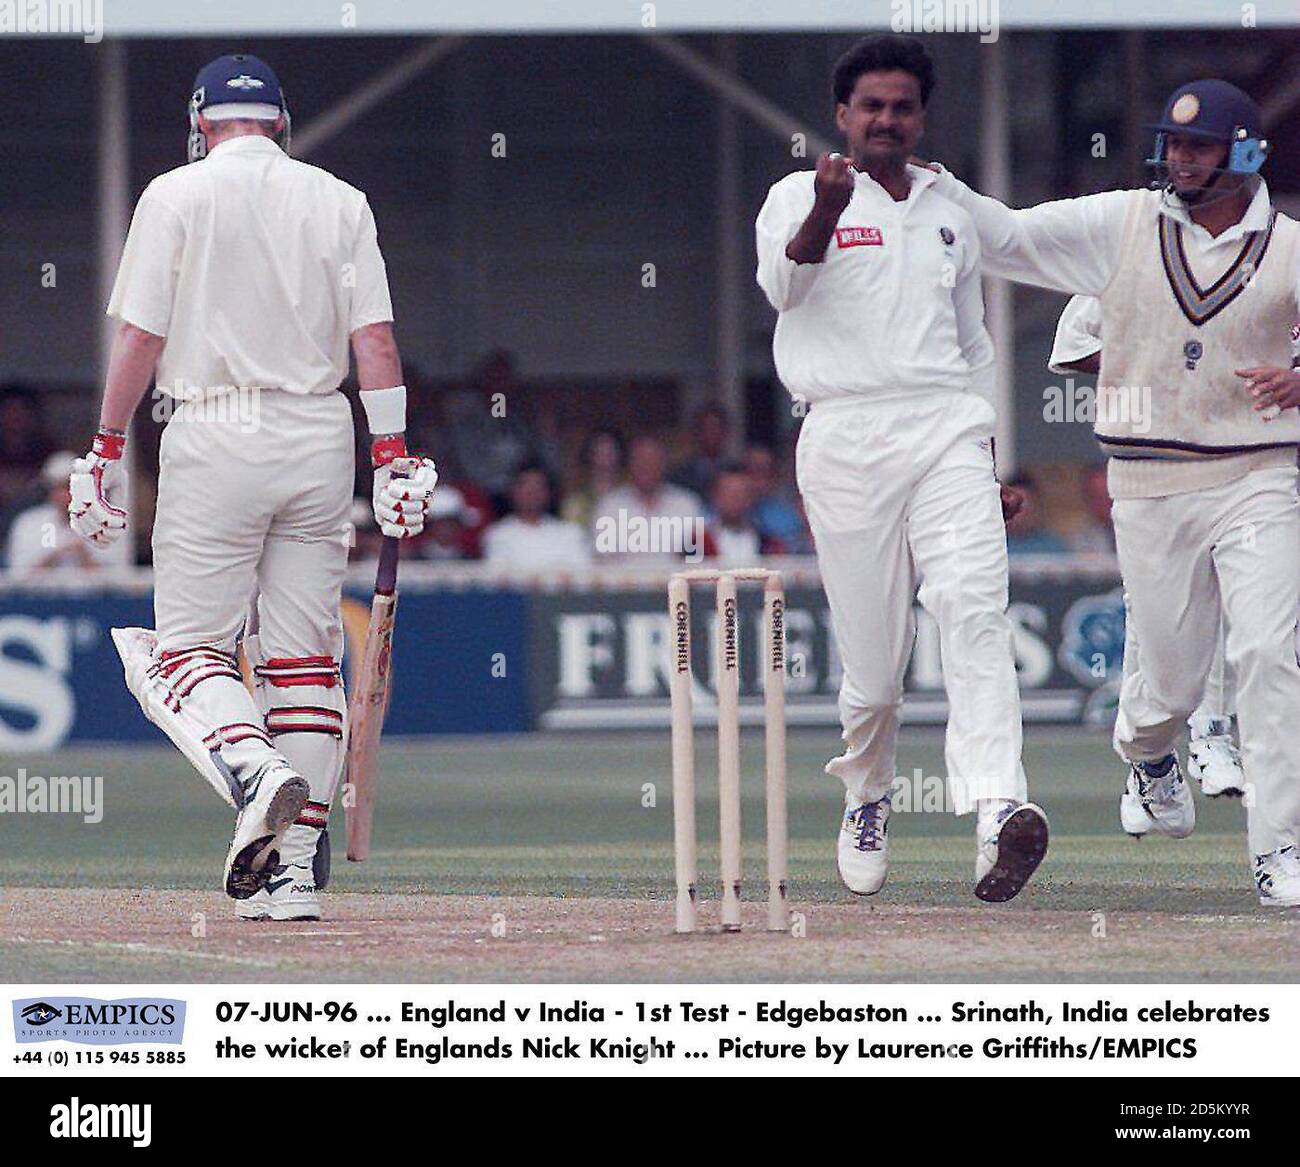 07-JUN-96 ... England v India - 1st Test - Edgebaston ... Srinath, India celebrates the wicket of Englands Nick Knight ... Picture by Laurence Griffiths/EMPICS Stock Photo